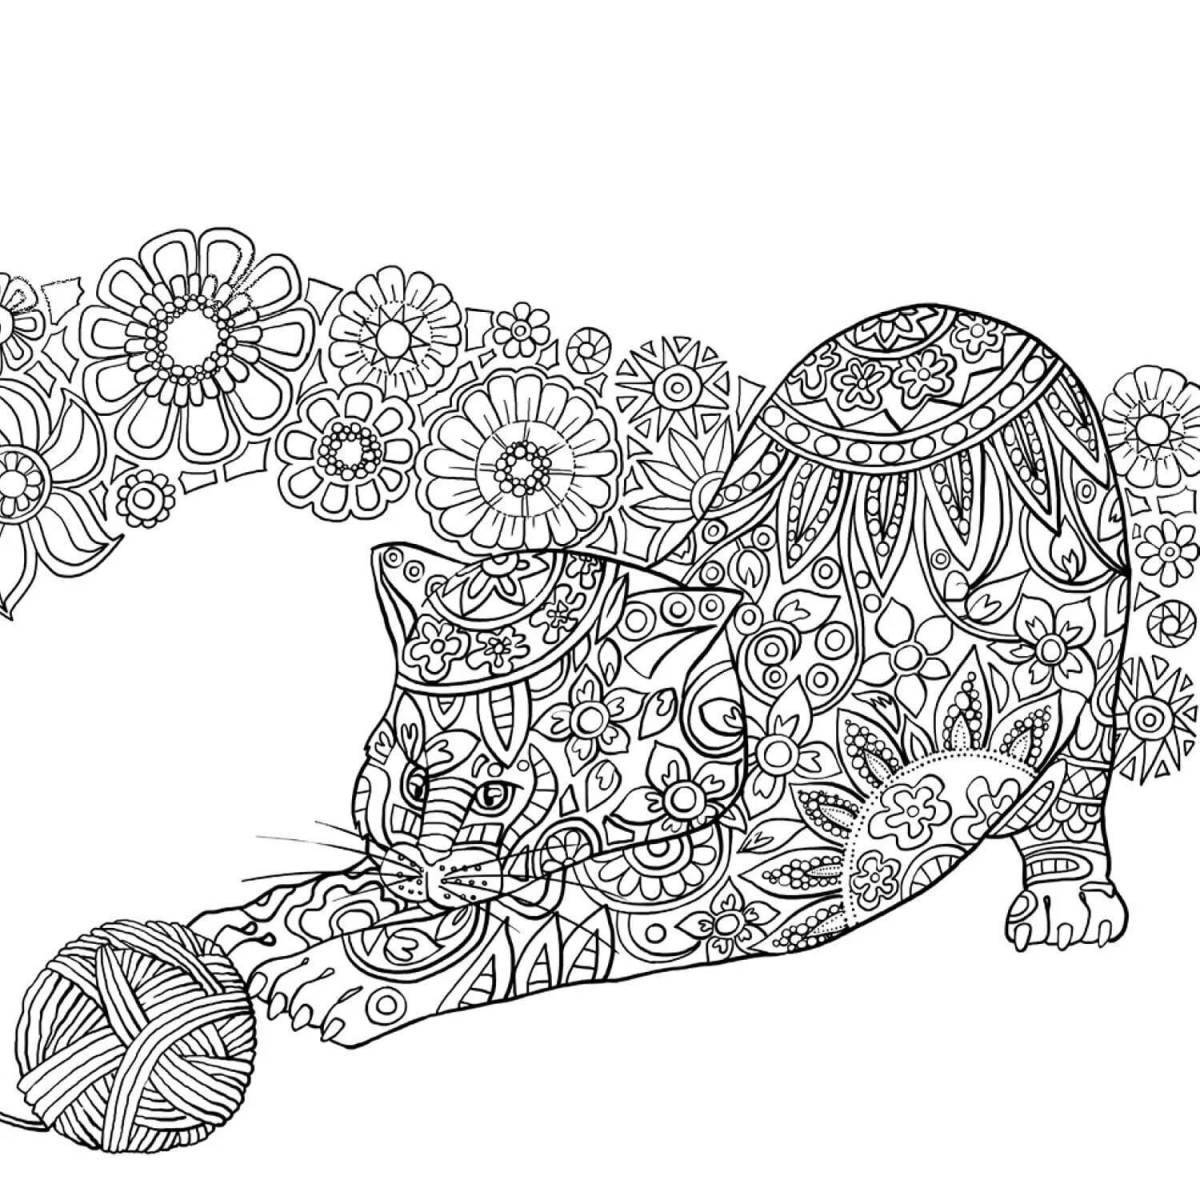 Fancy animal coloring for girls